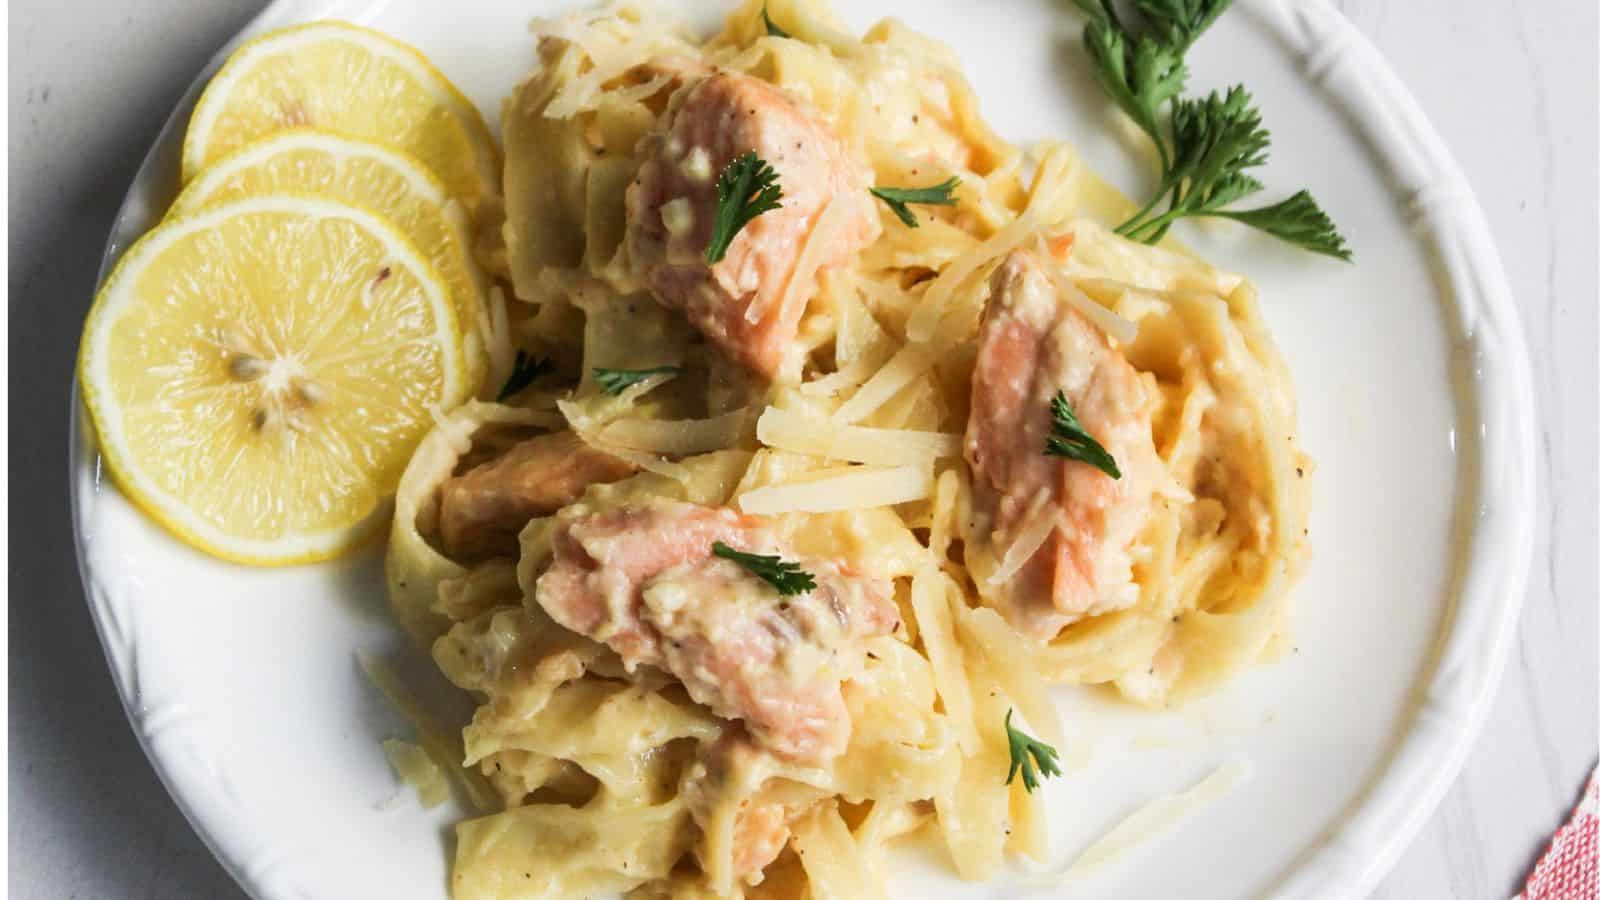 Salmon pasta Alfredo served on a white plate with lemon.